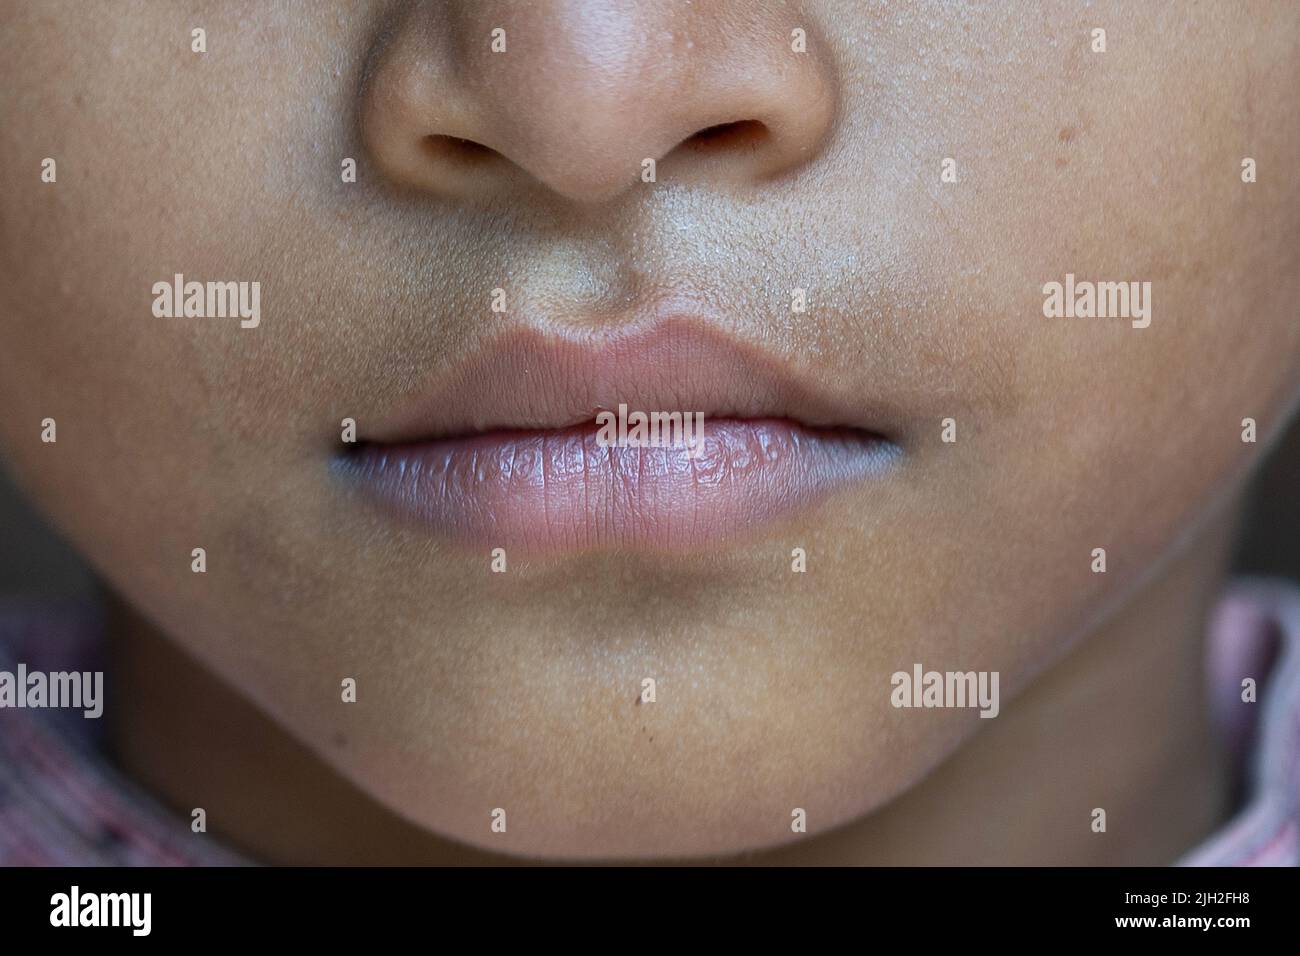 Close up of pink lips of a baby Stock Photo